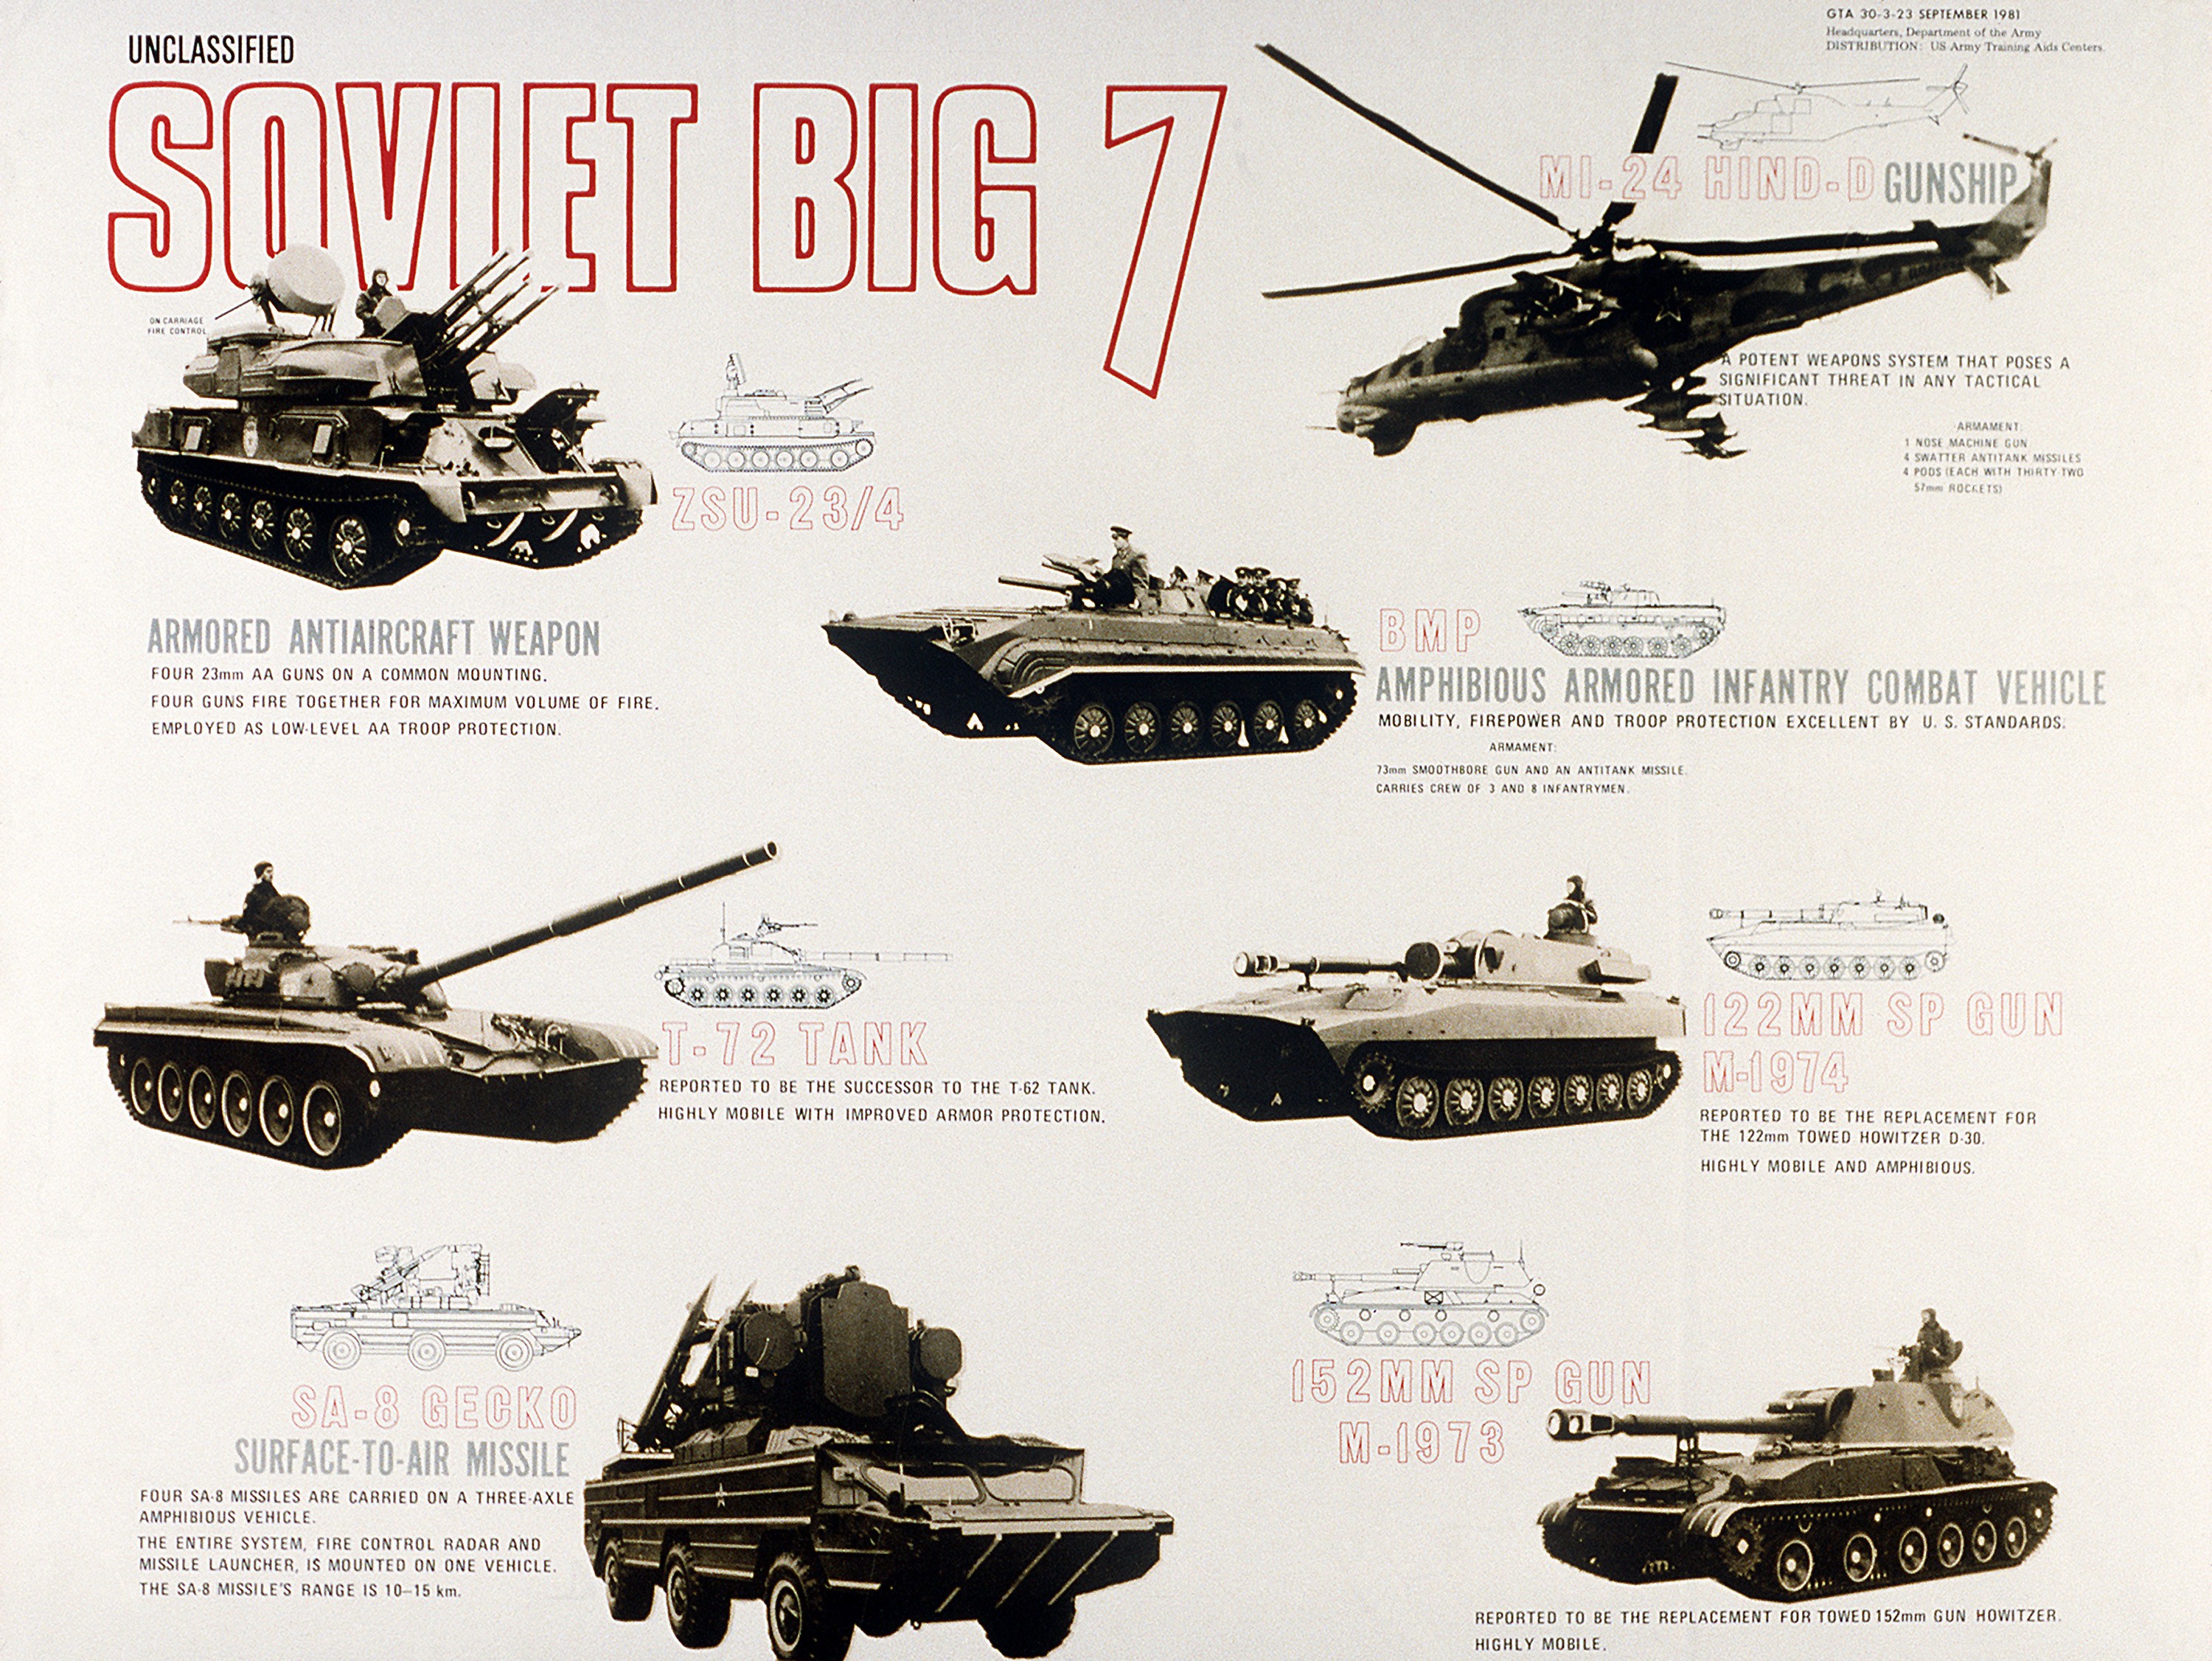 warsaw Pact, USSR, Soviet Union, Weapon, Helicopters, SPAAG, T 72, Mi 24, APC Wallpaper